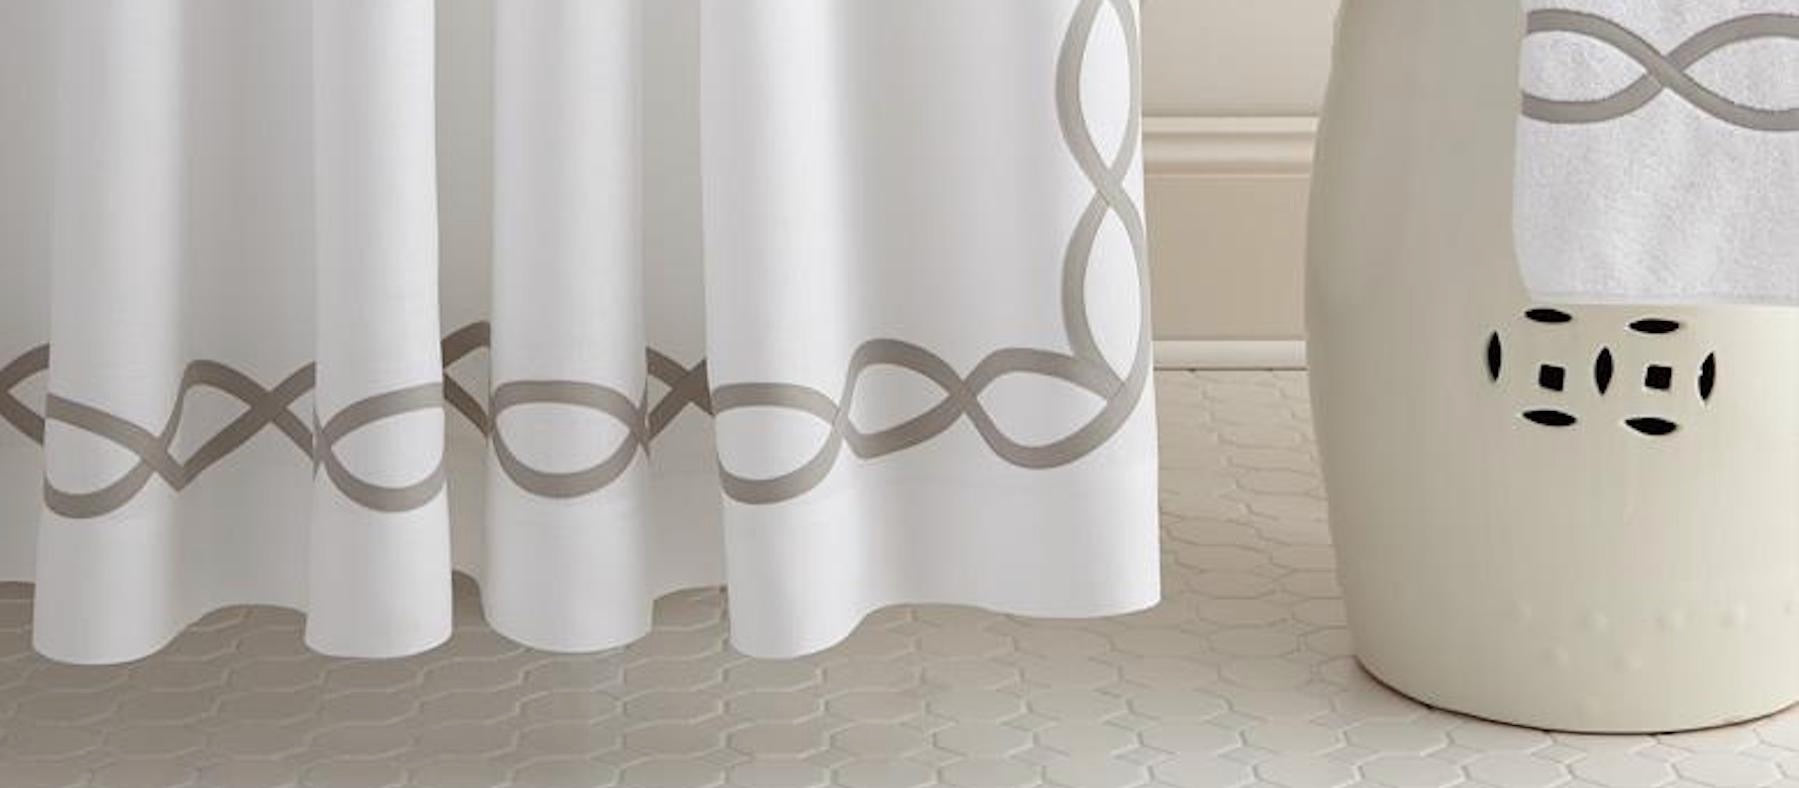 Shower Curtains - Bathroom Shower Curtain Selection for all shower sizes - Available at Fig Linens and Home